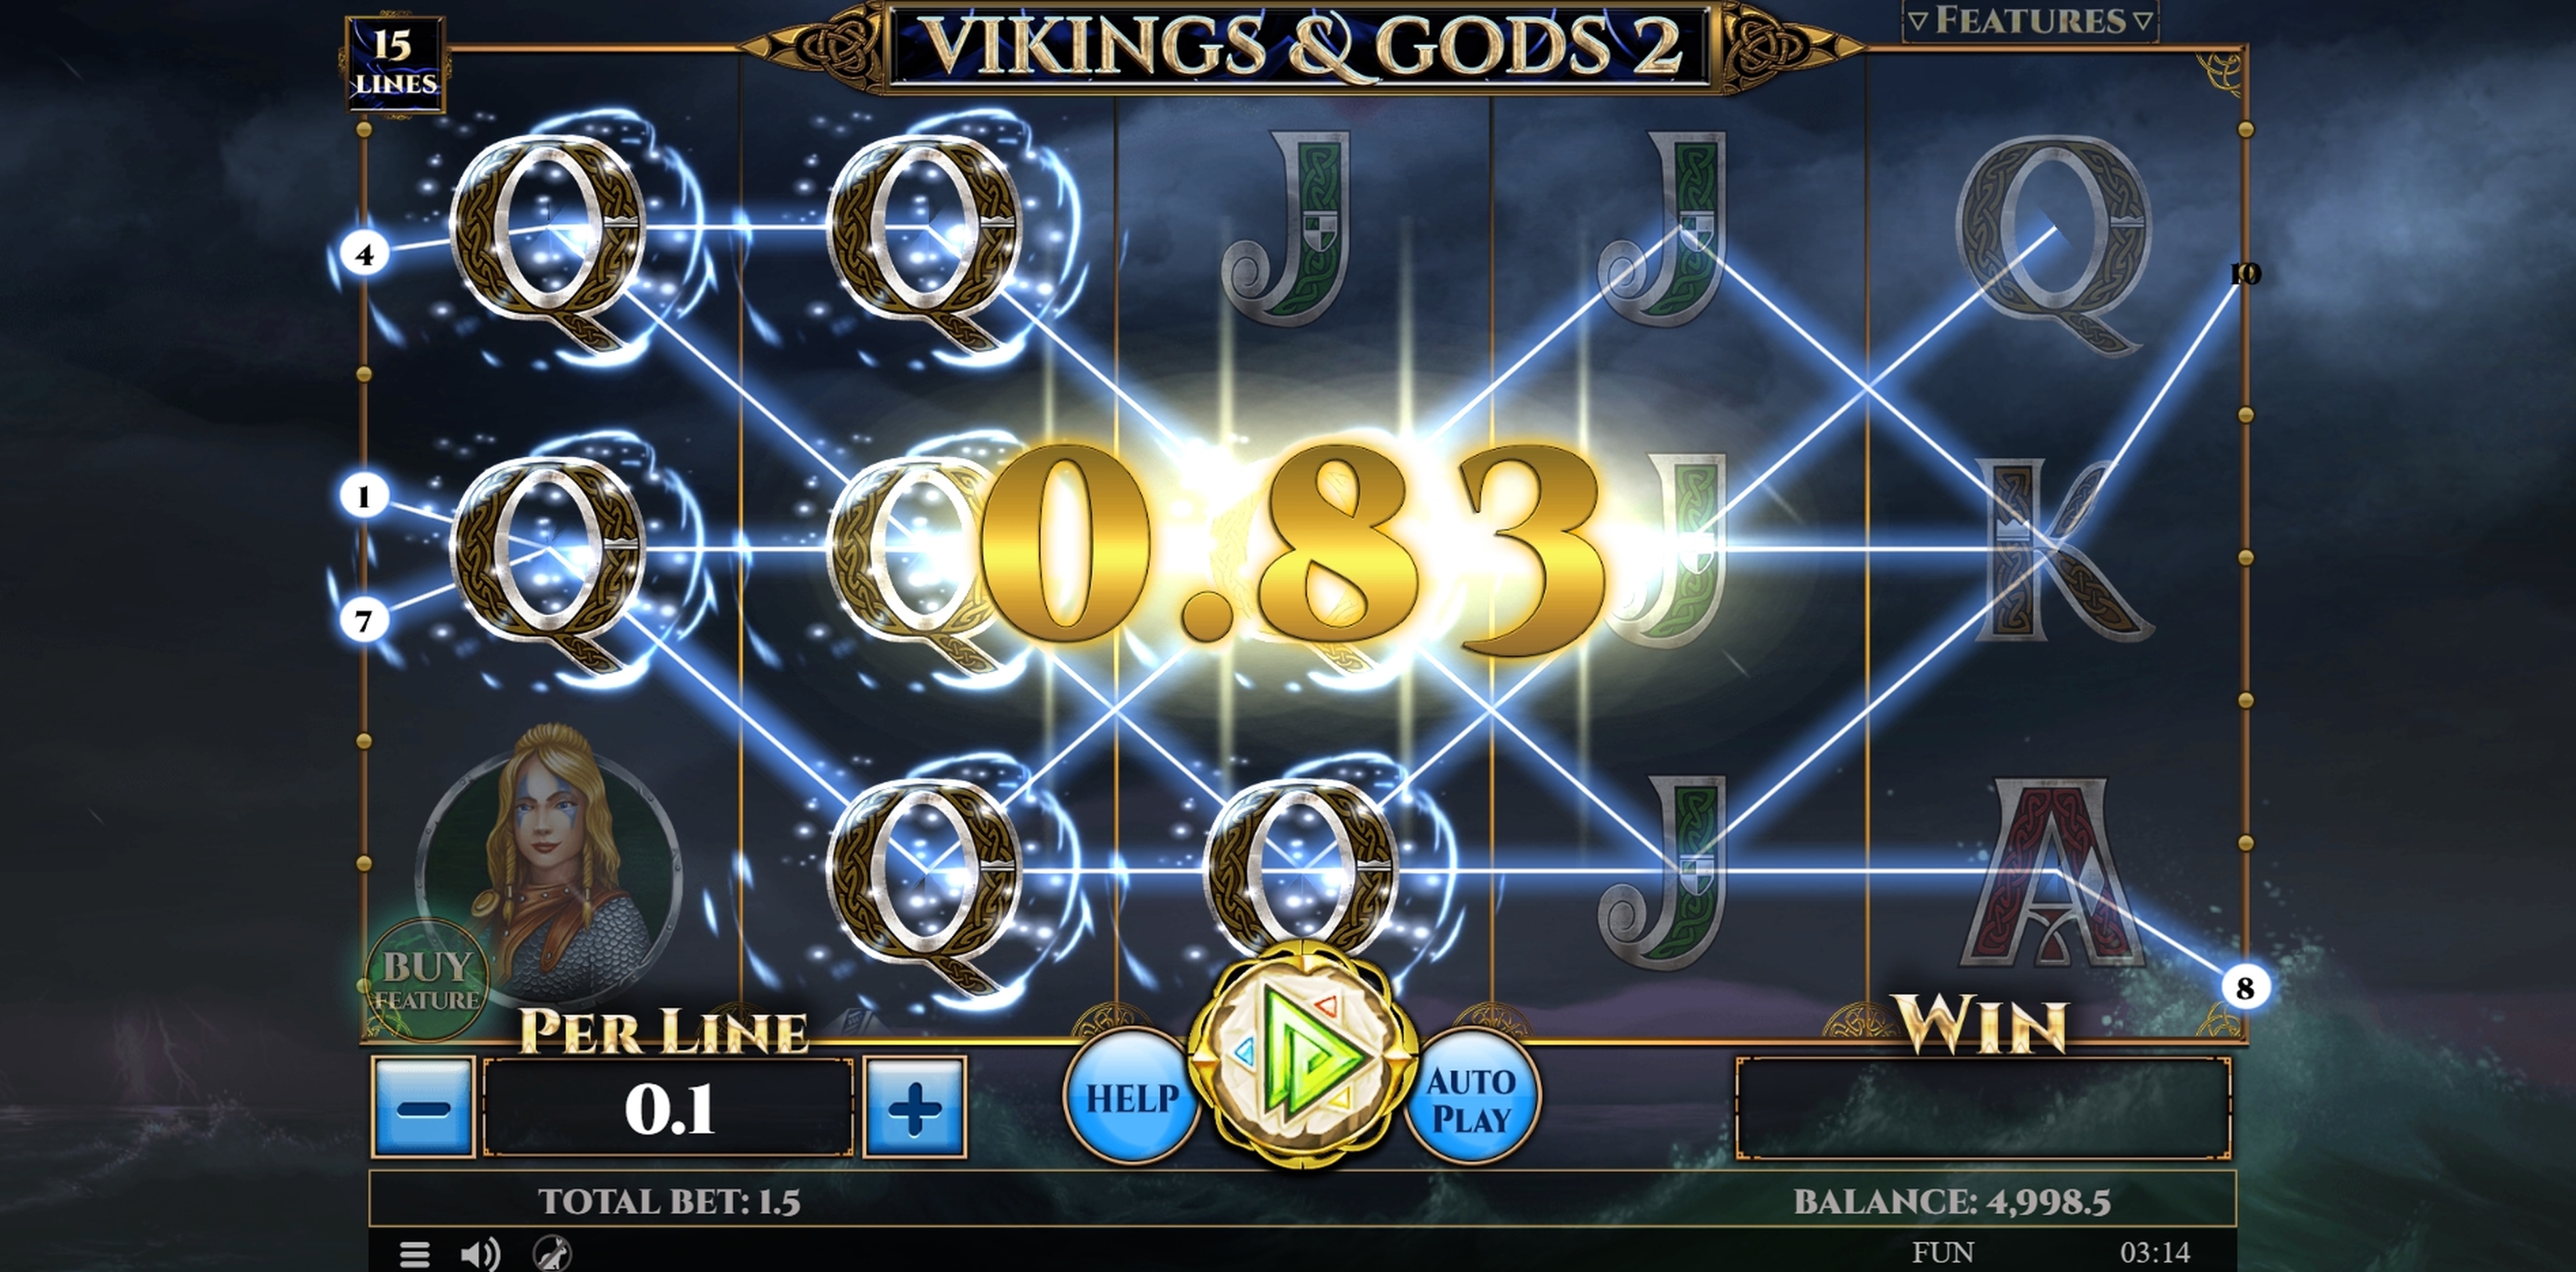 Win Money in Vikings and Gods 2 15 Lines Free Slot Game by Spinomenal